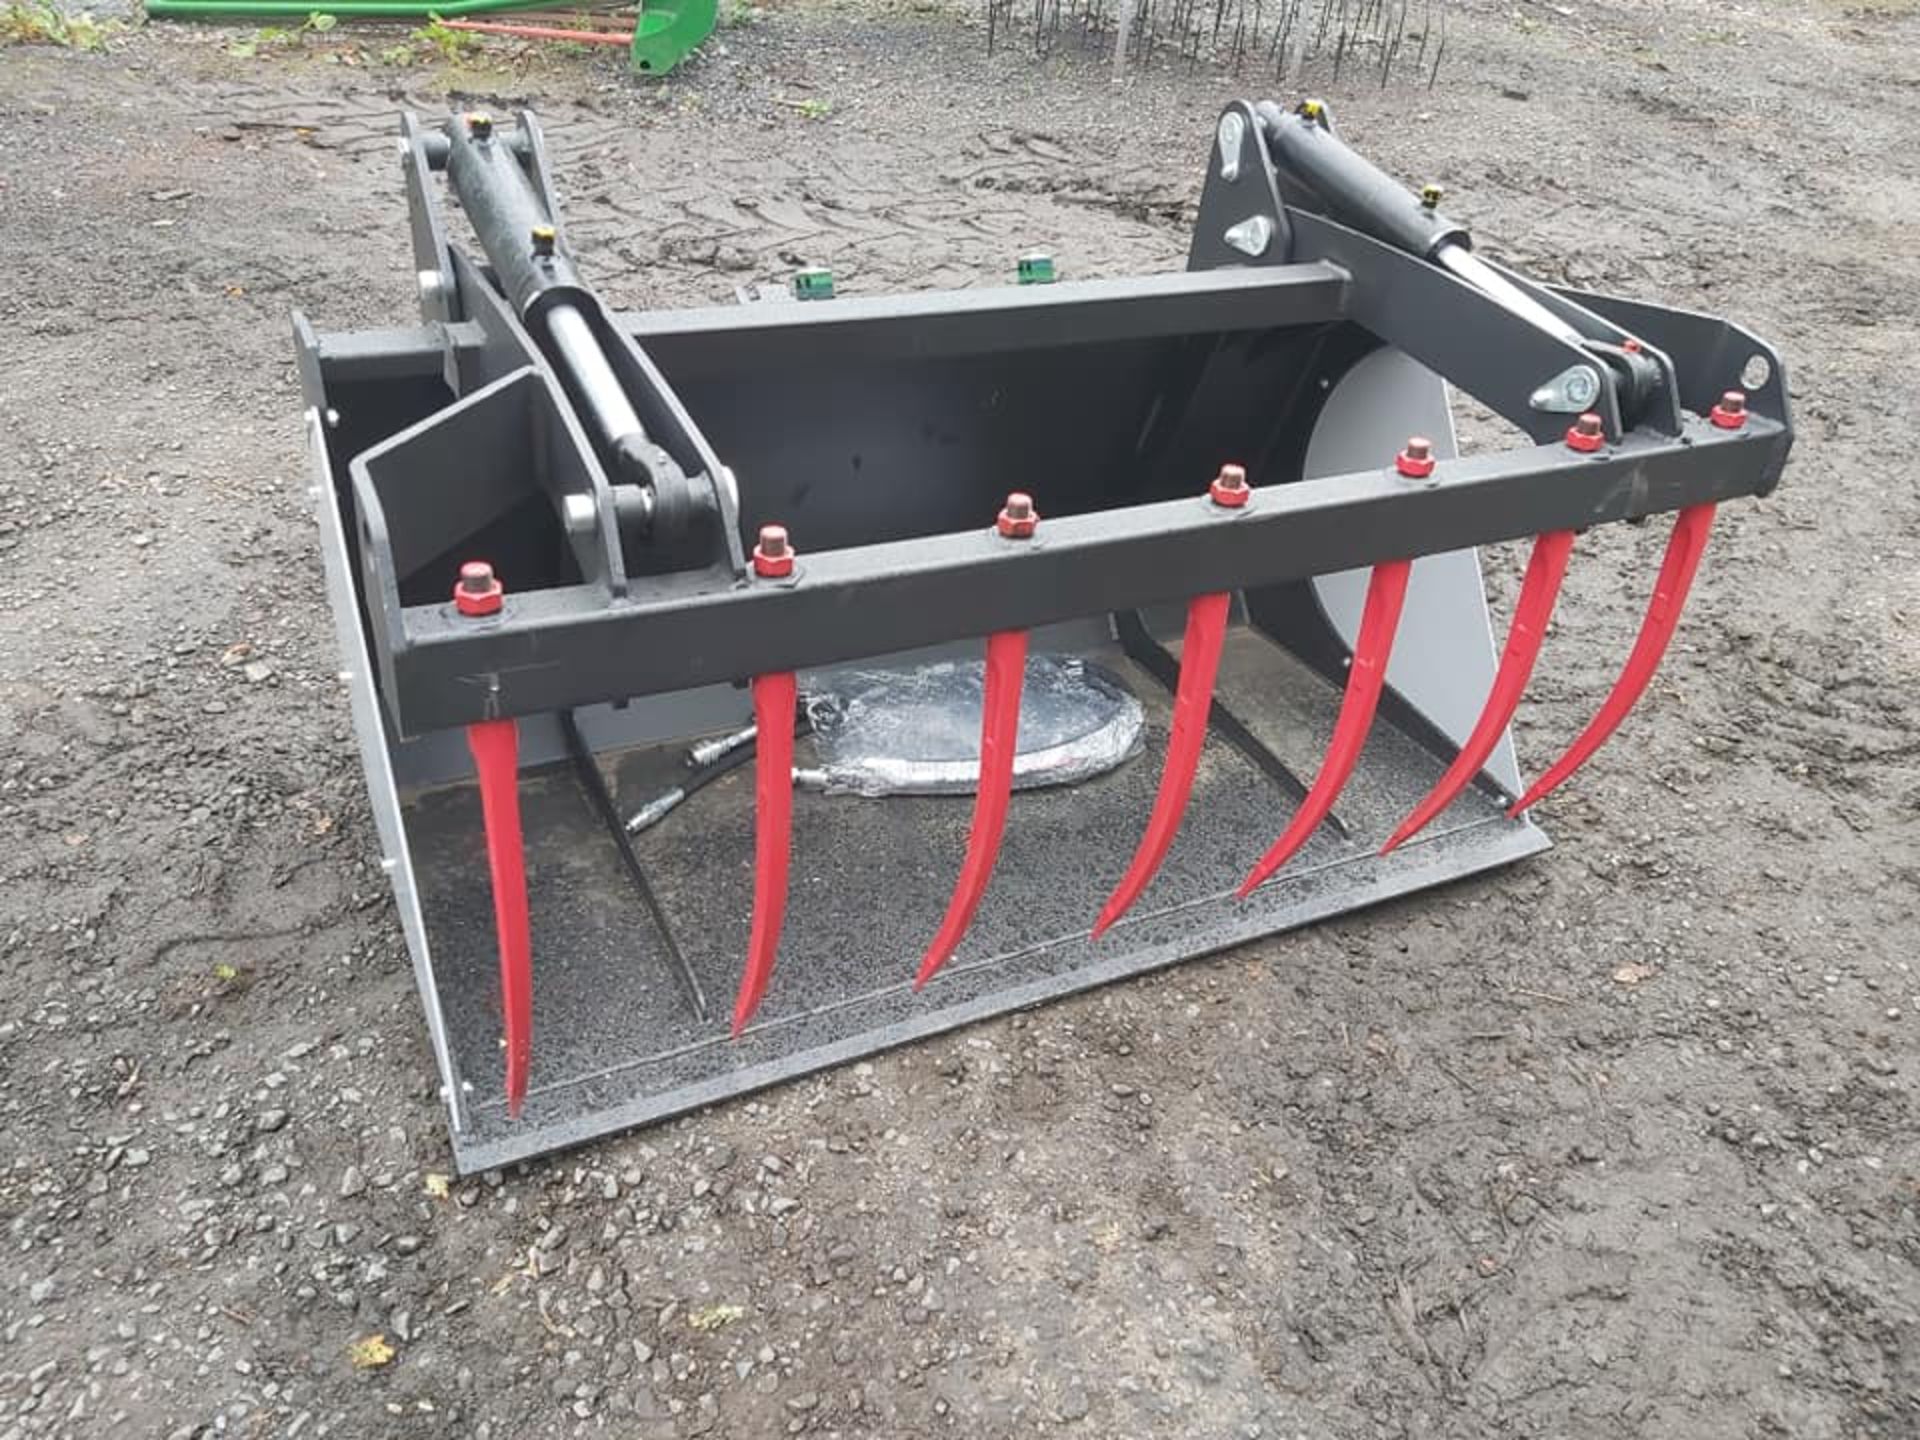 Bucket grab 1.8m, pipes and euro 8 brackets included, removable side panels.